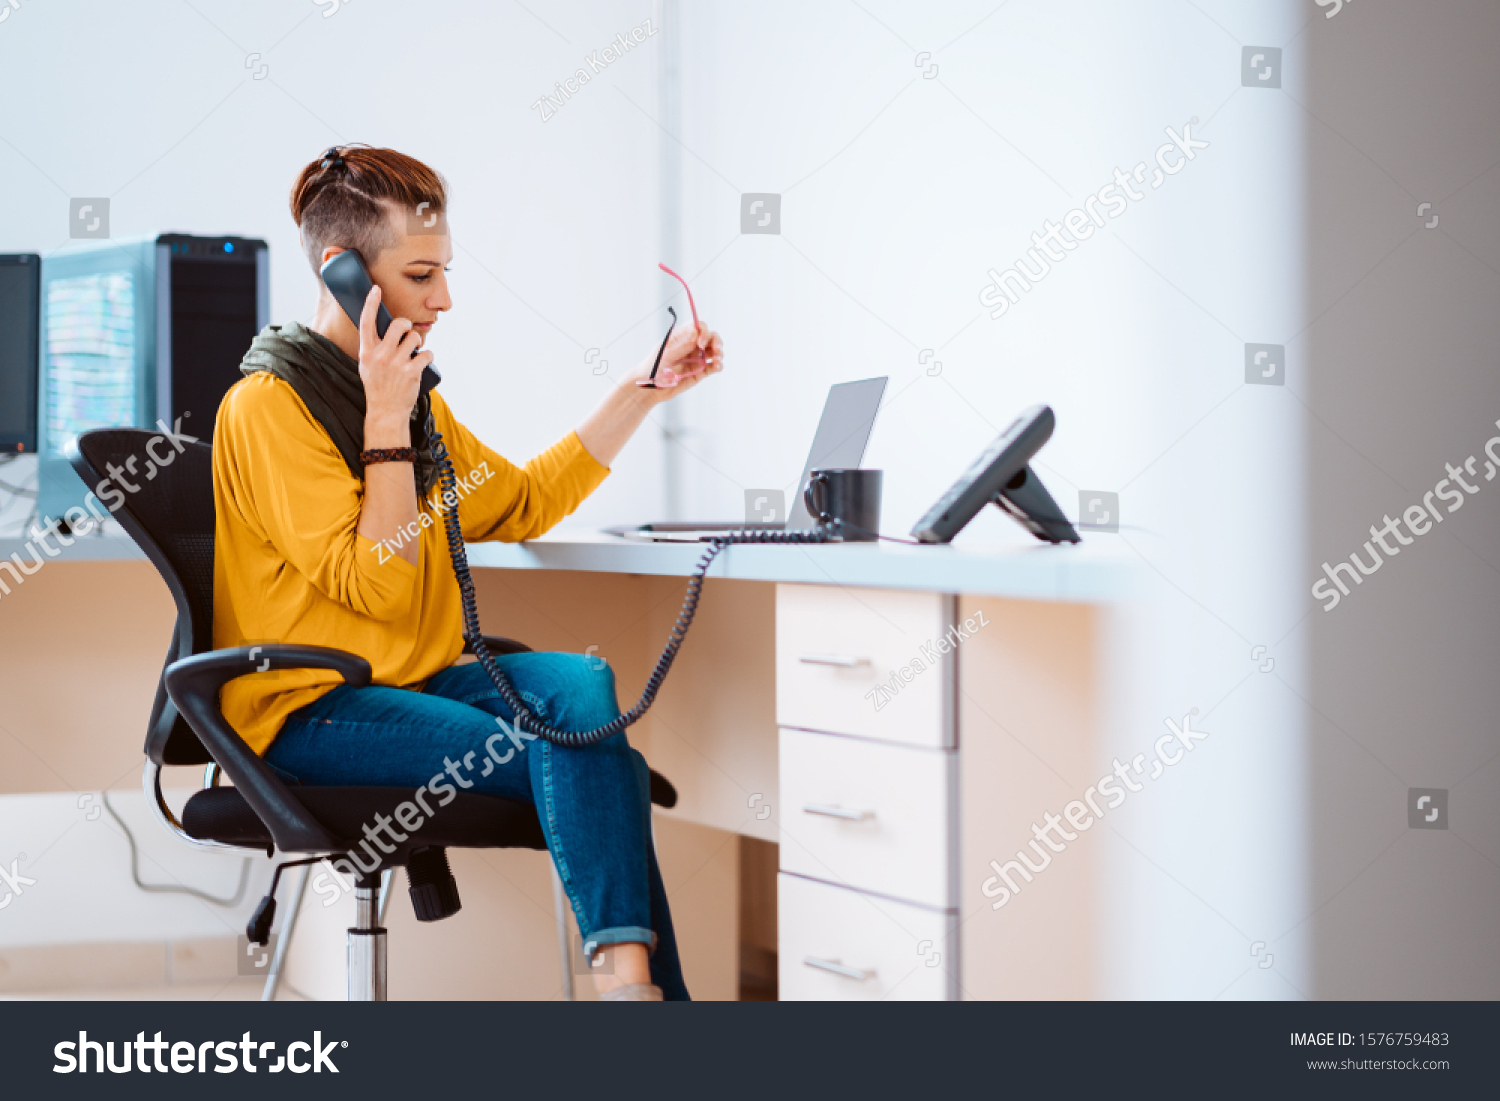 Businesswoman sitting at the desk and using landline phone in the office #1576759483